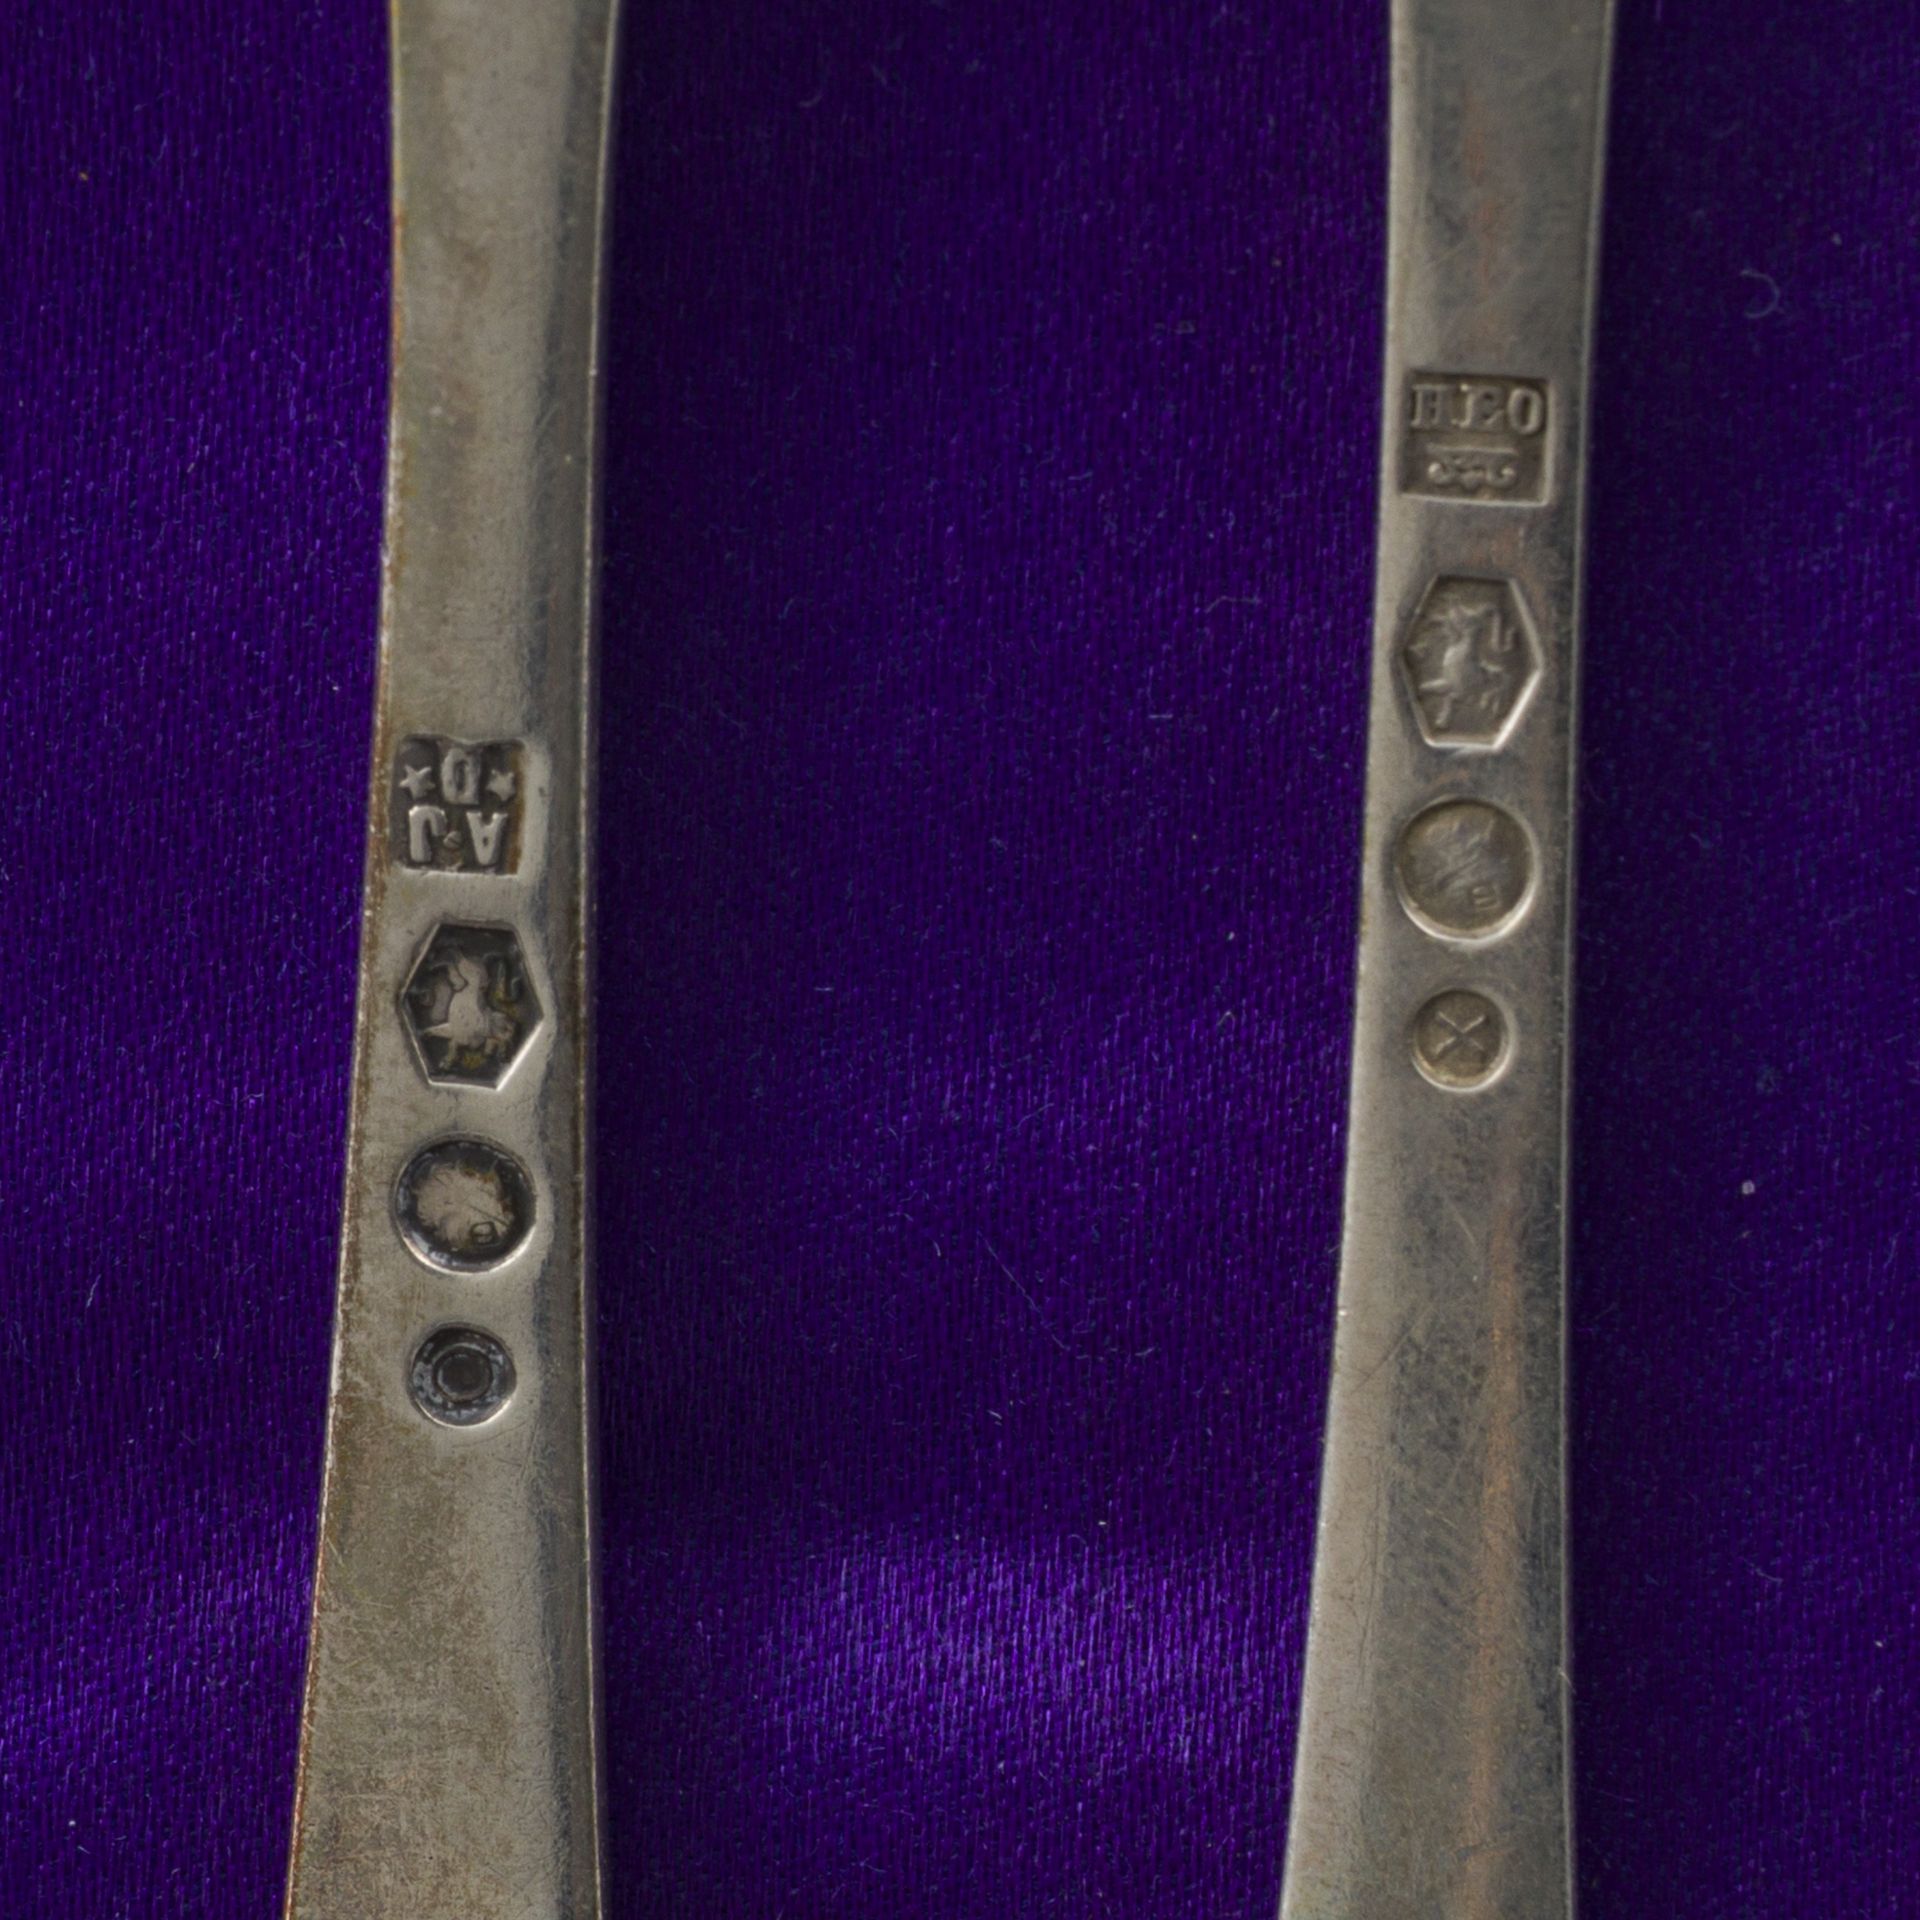 24-piece set of spoons & forks "Haags Lofje" silver. - Image 2 of 3